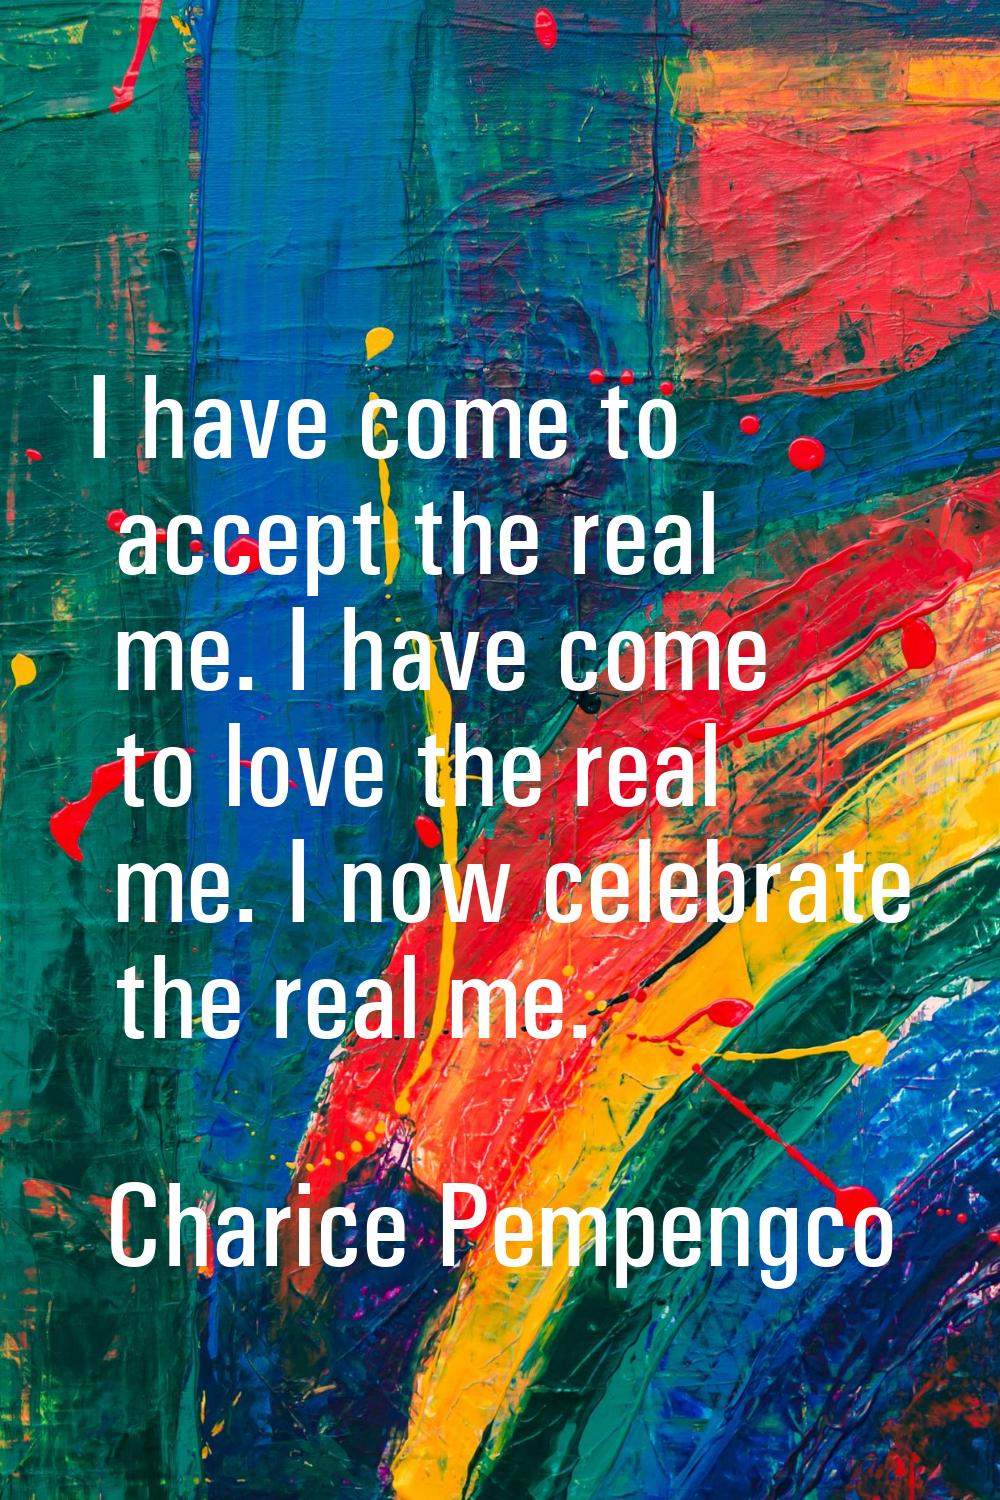 I have come to accept the real me. I have come to love the real me. I now celebrate the real me.